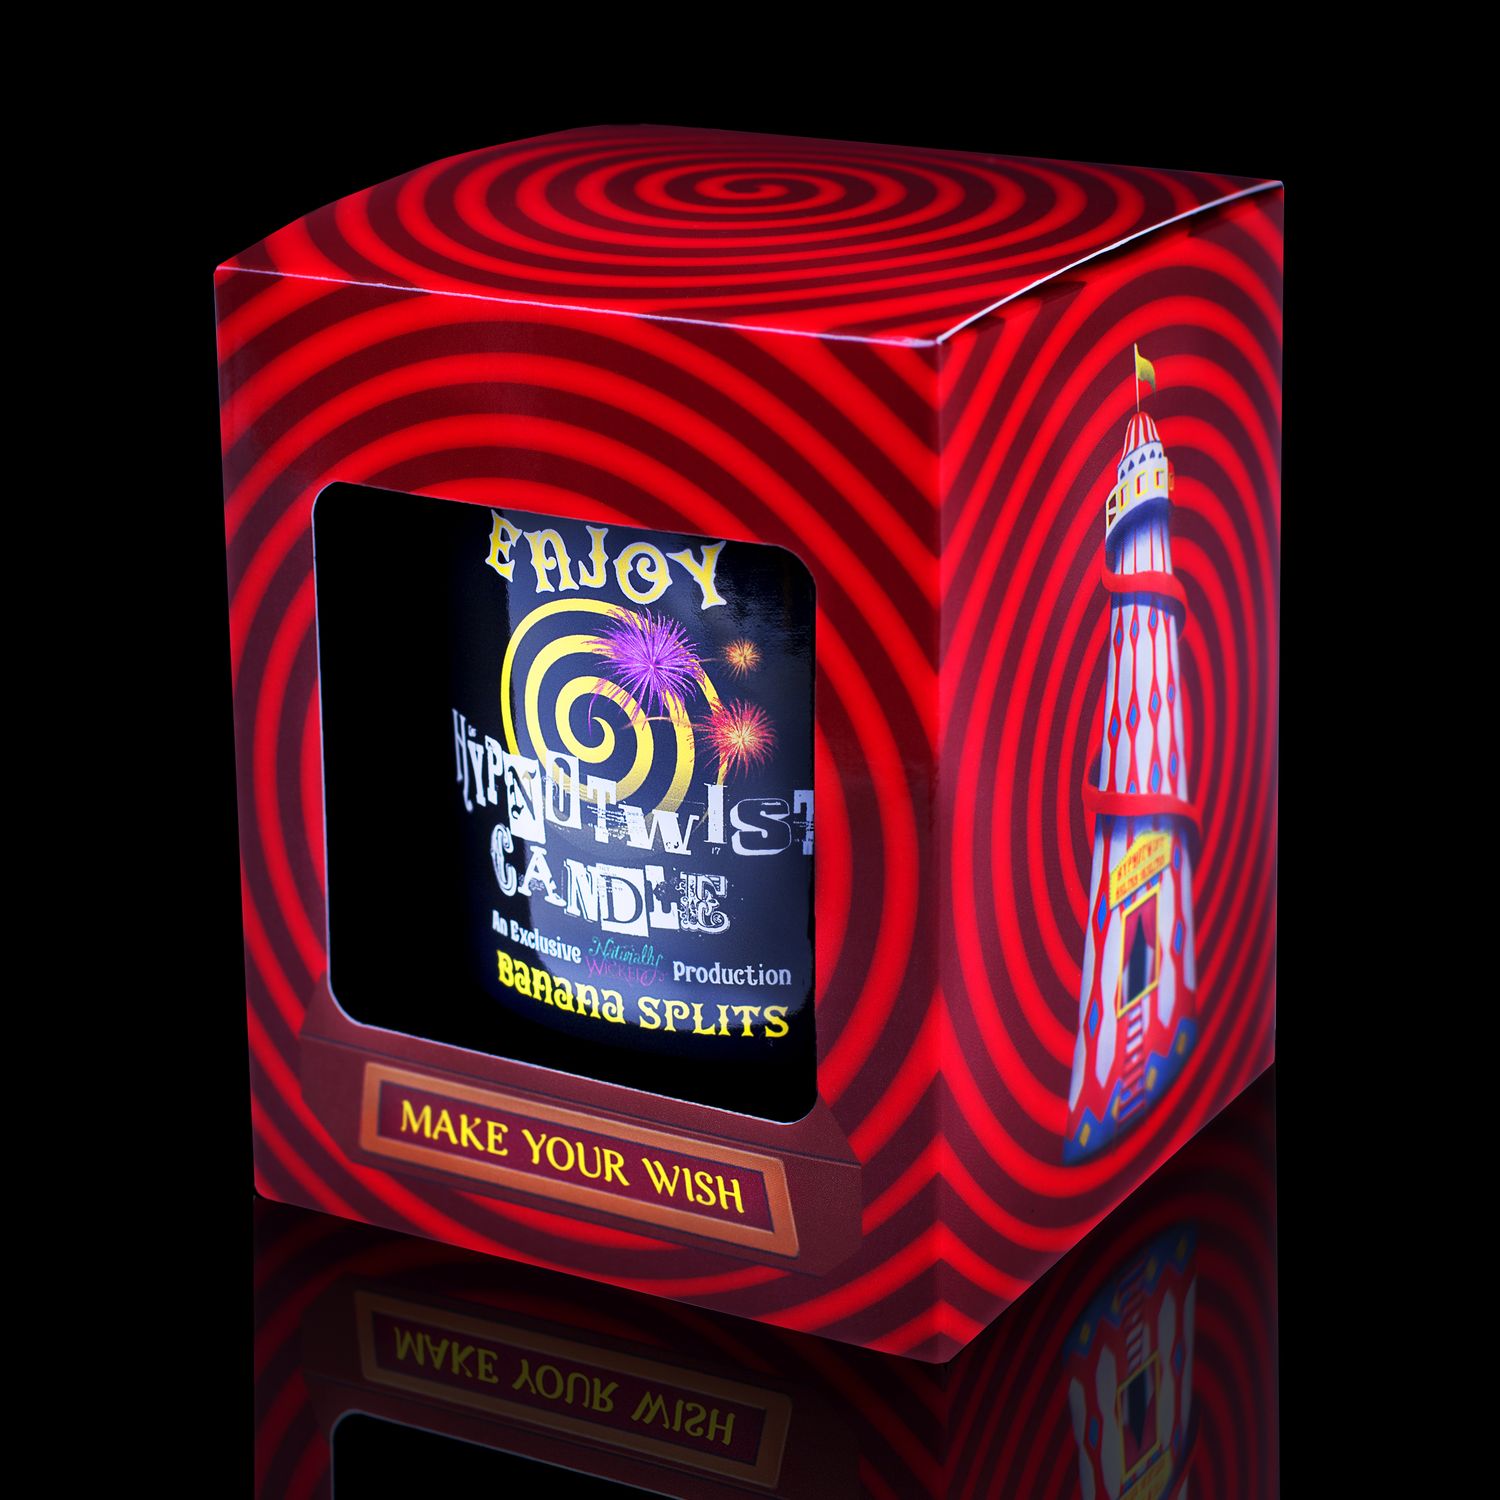 Side View Of The Naturally Wicked Hypnotwist Enjoy Candle, Plant-based Soy Yellow Wax Scented With Banana Splits, Including A Yellow Jade Crystal Spinning Top, Mirrored Lid & Red Circus Hypnotic Gift Box